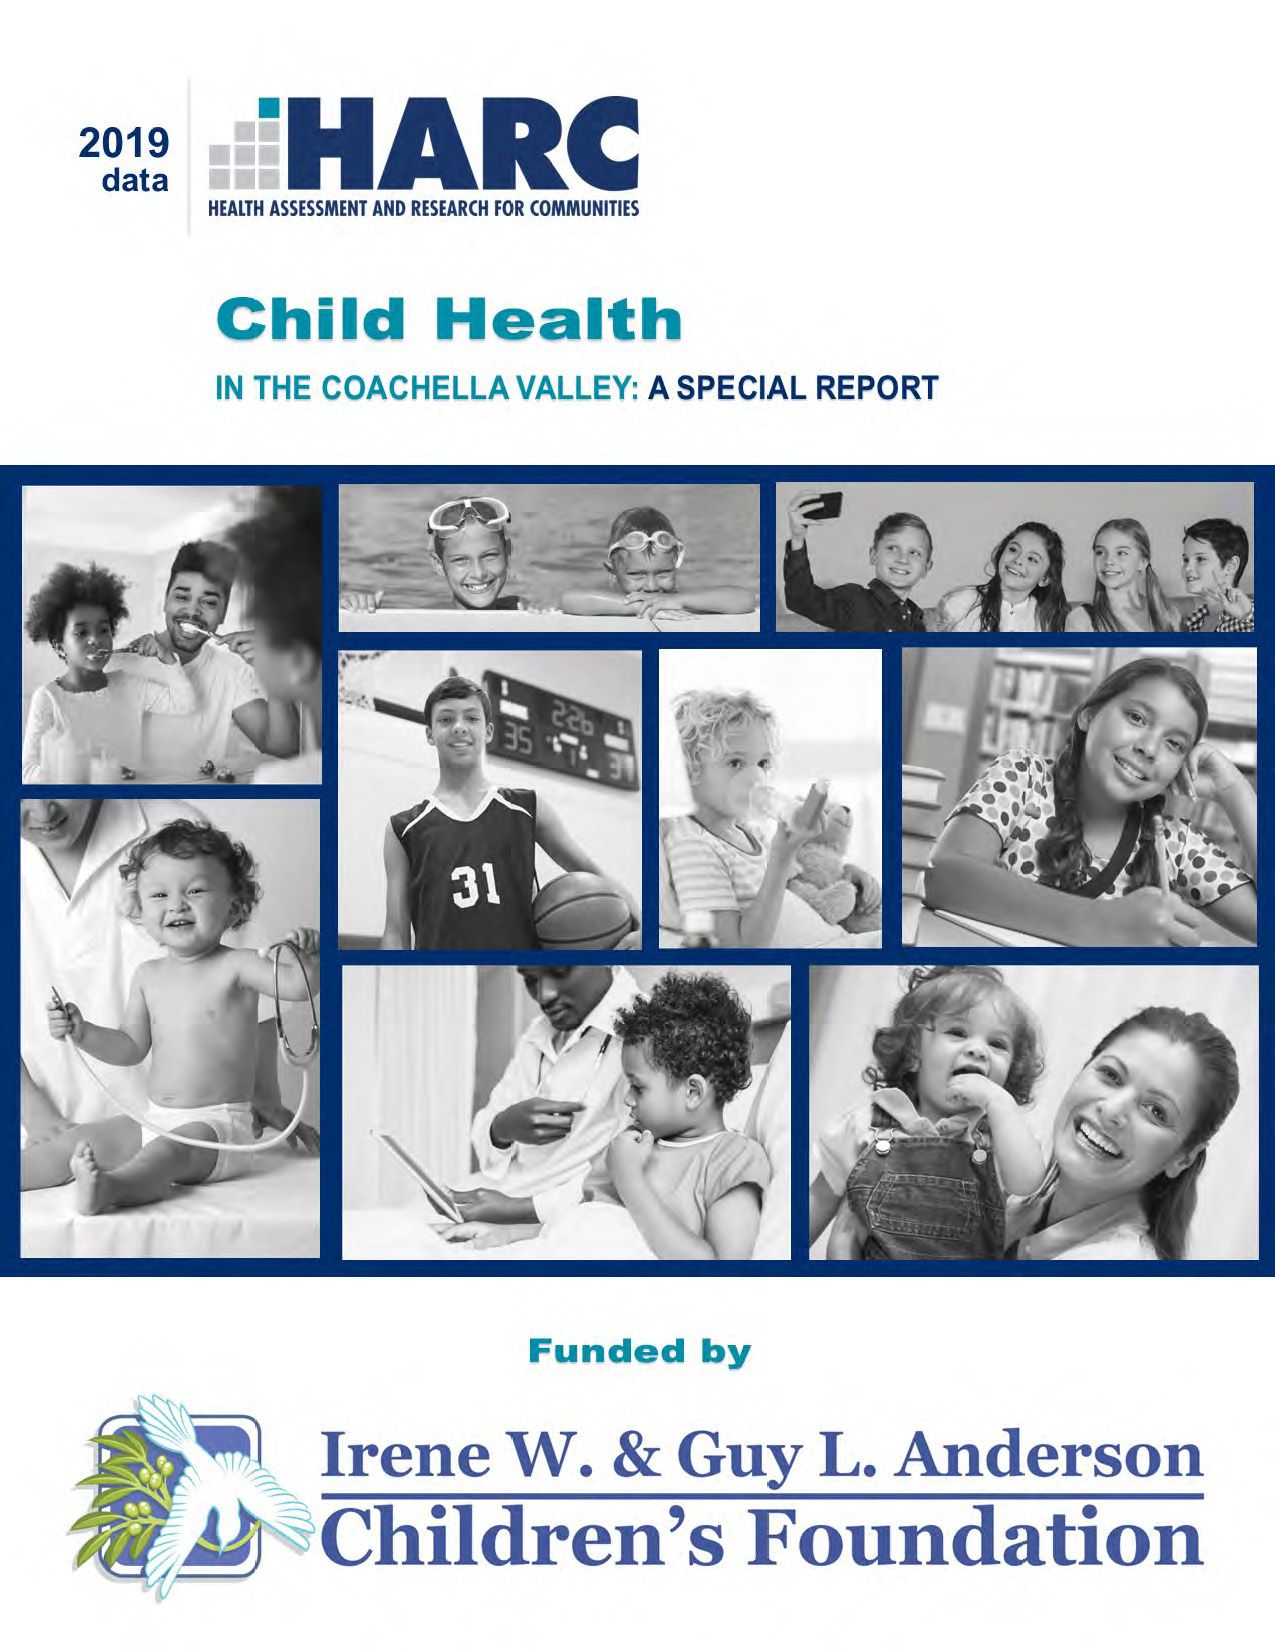 2019 Data Child Health in the Coachella Valley a special report funded by Irene W. & Guy L. Anderson Children's Foundation